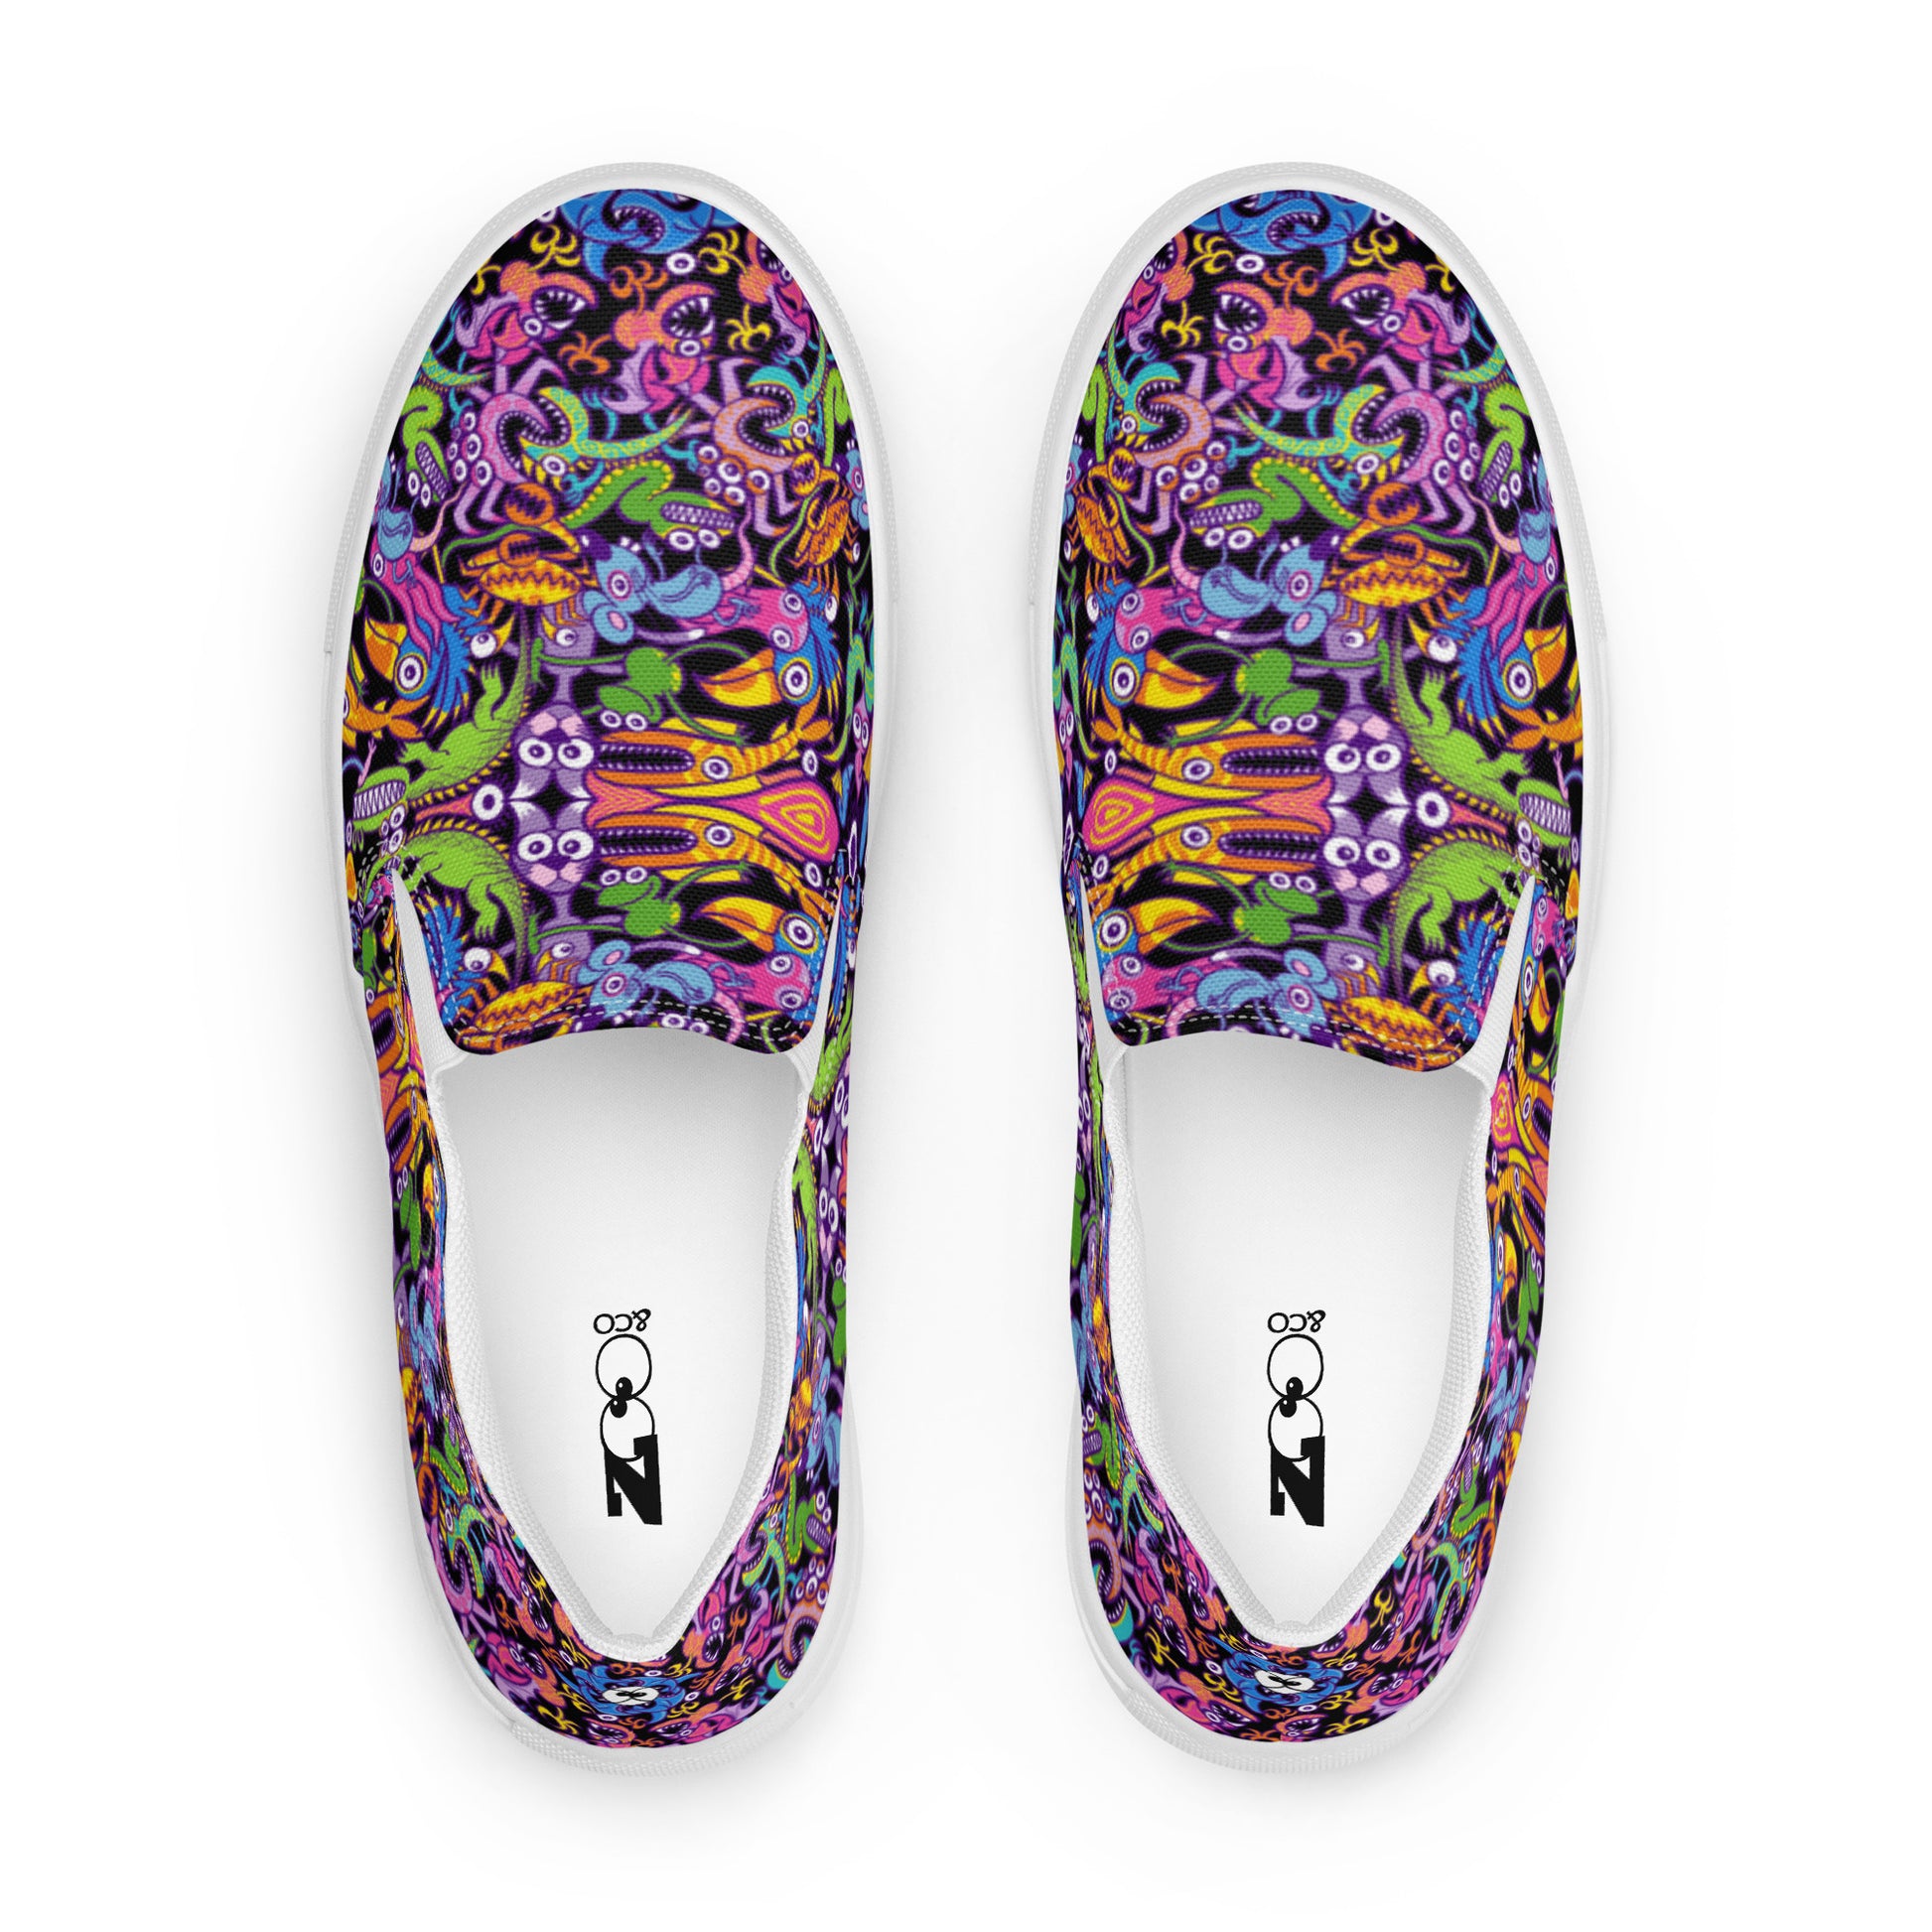 Eccentric critters in a crazy lively festival Women’s slip-on canvas shoes. Top view